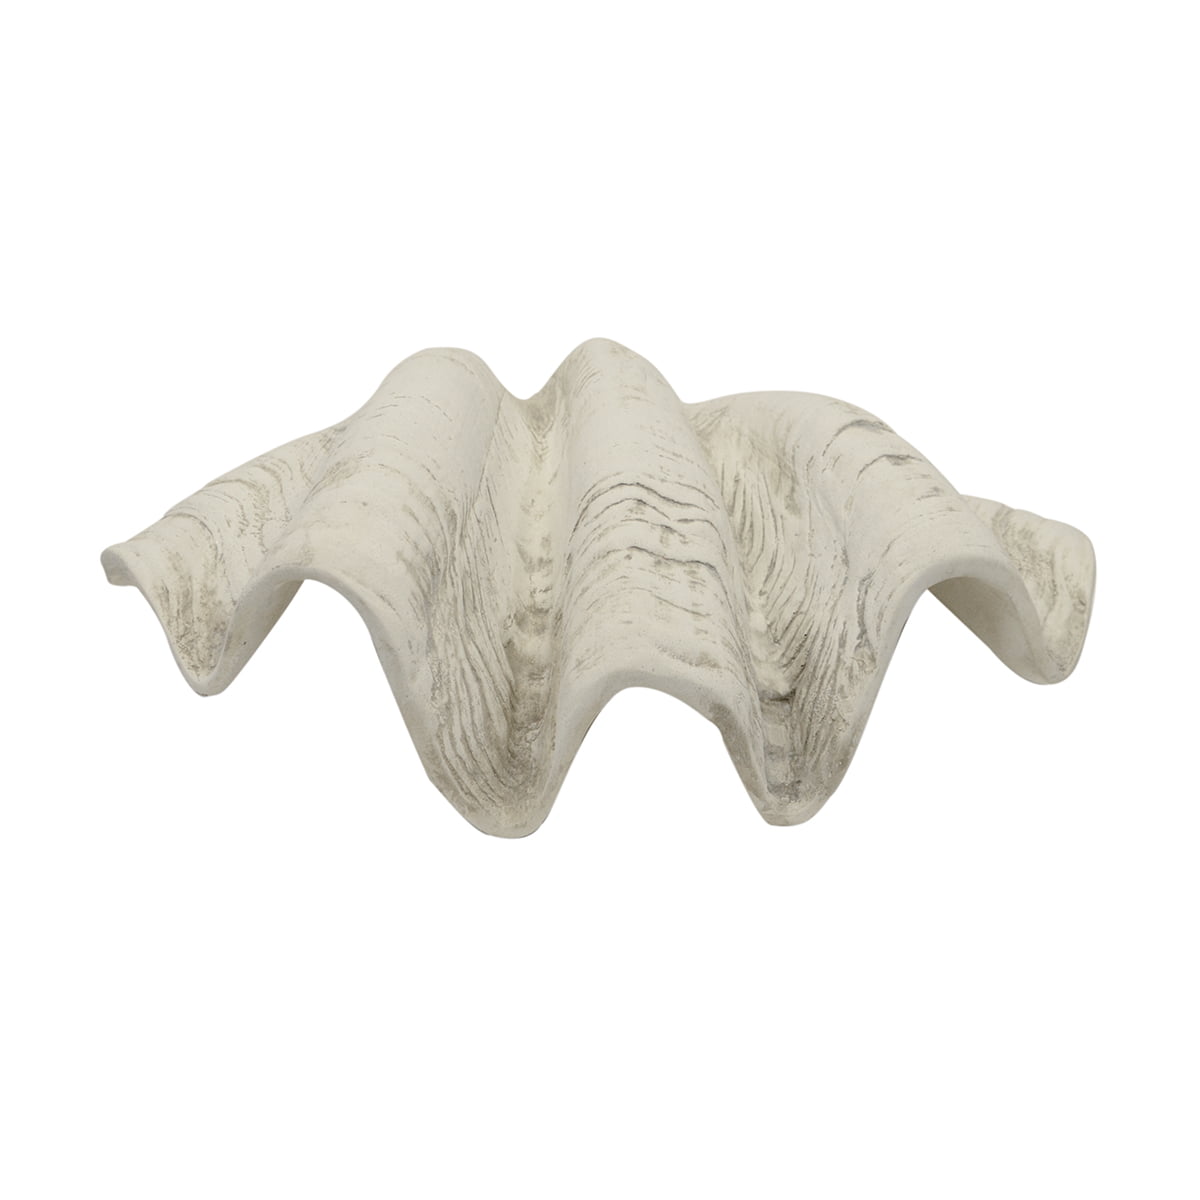 Giant Clam Shell 22 Inch White Gray Clamshell Seashell